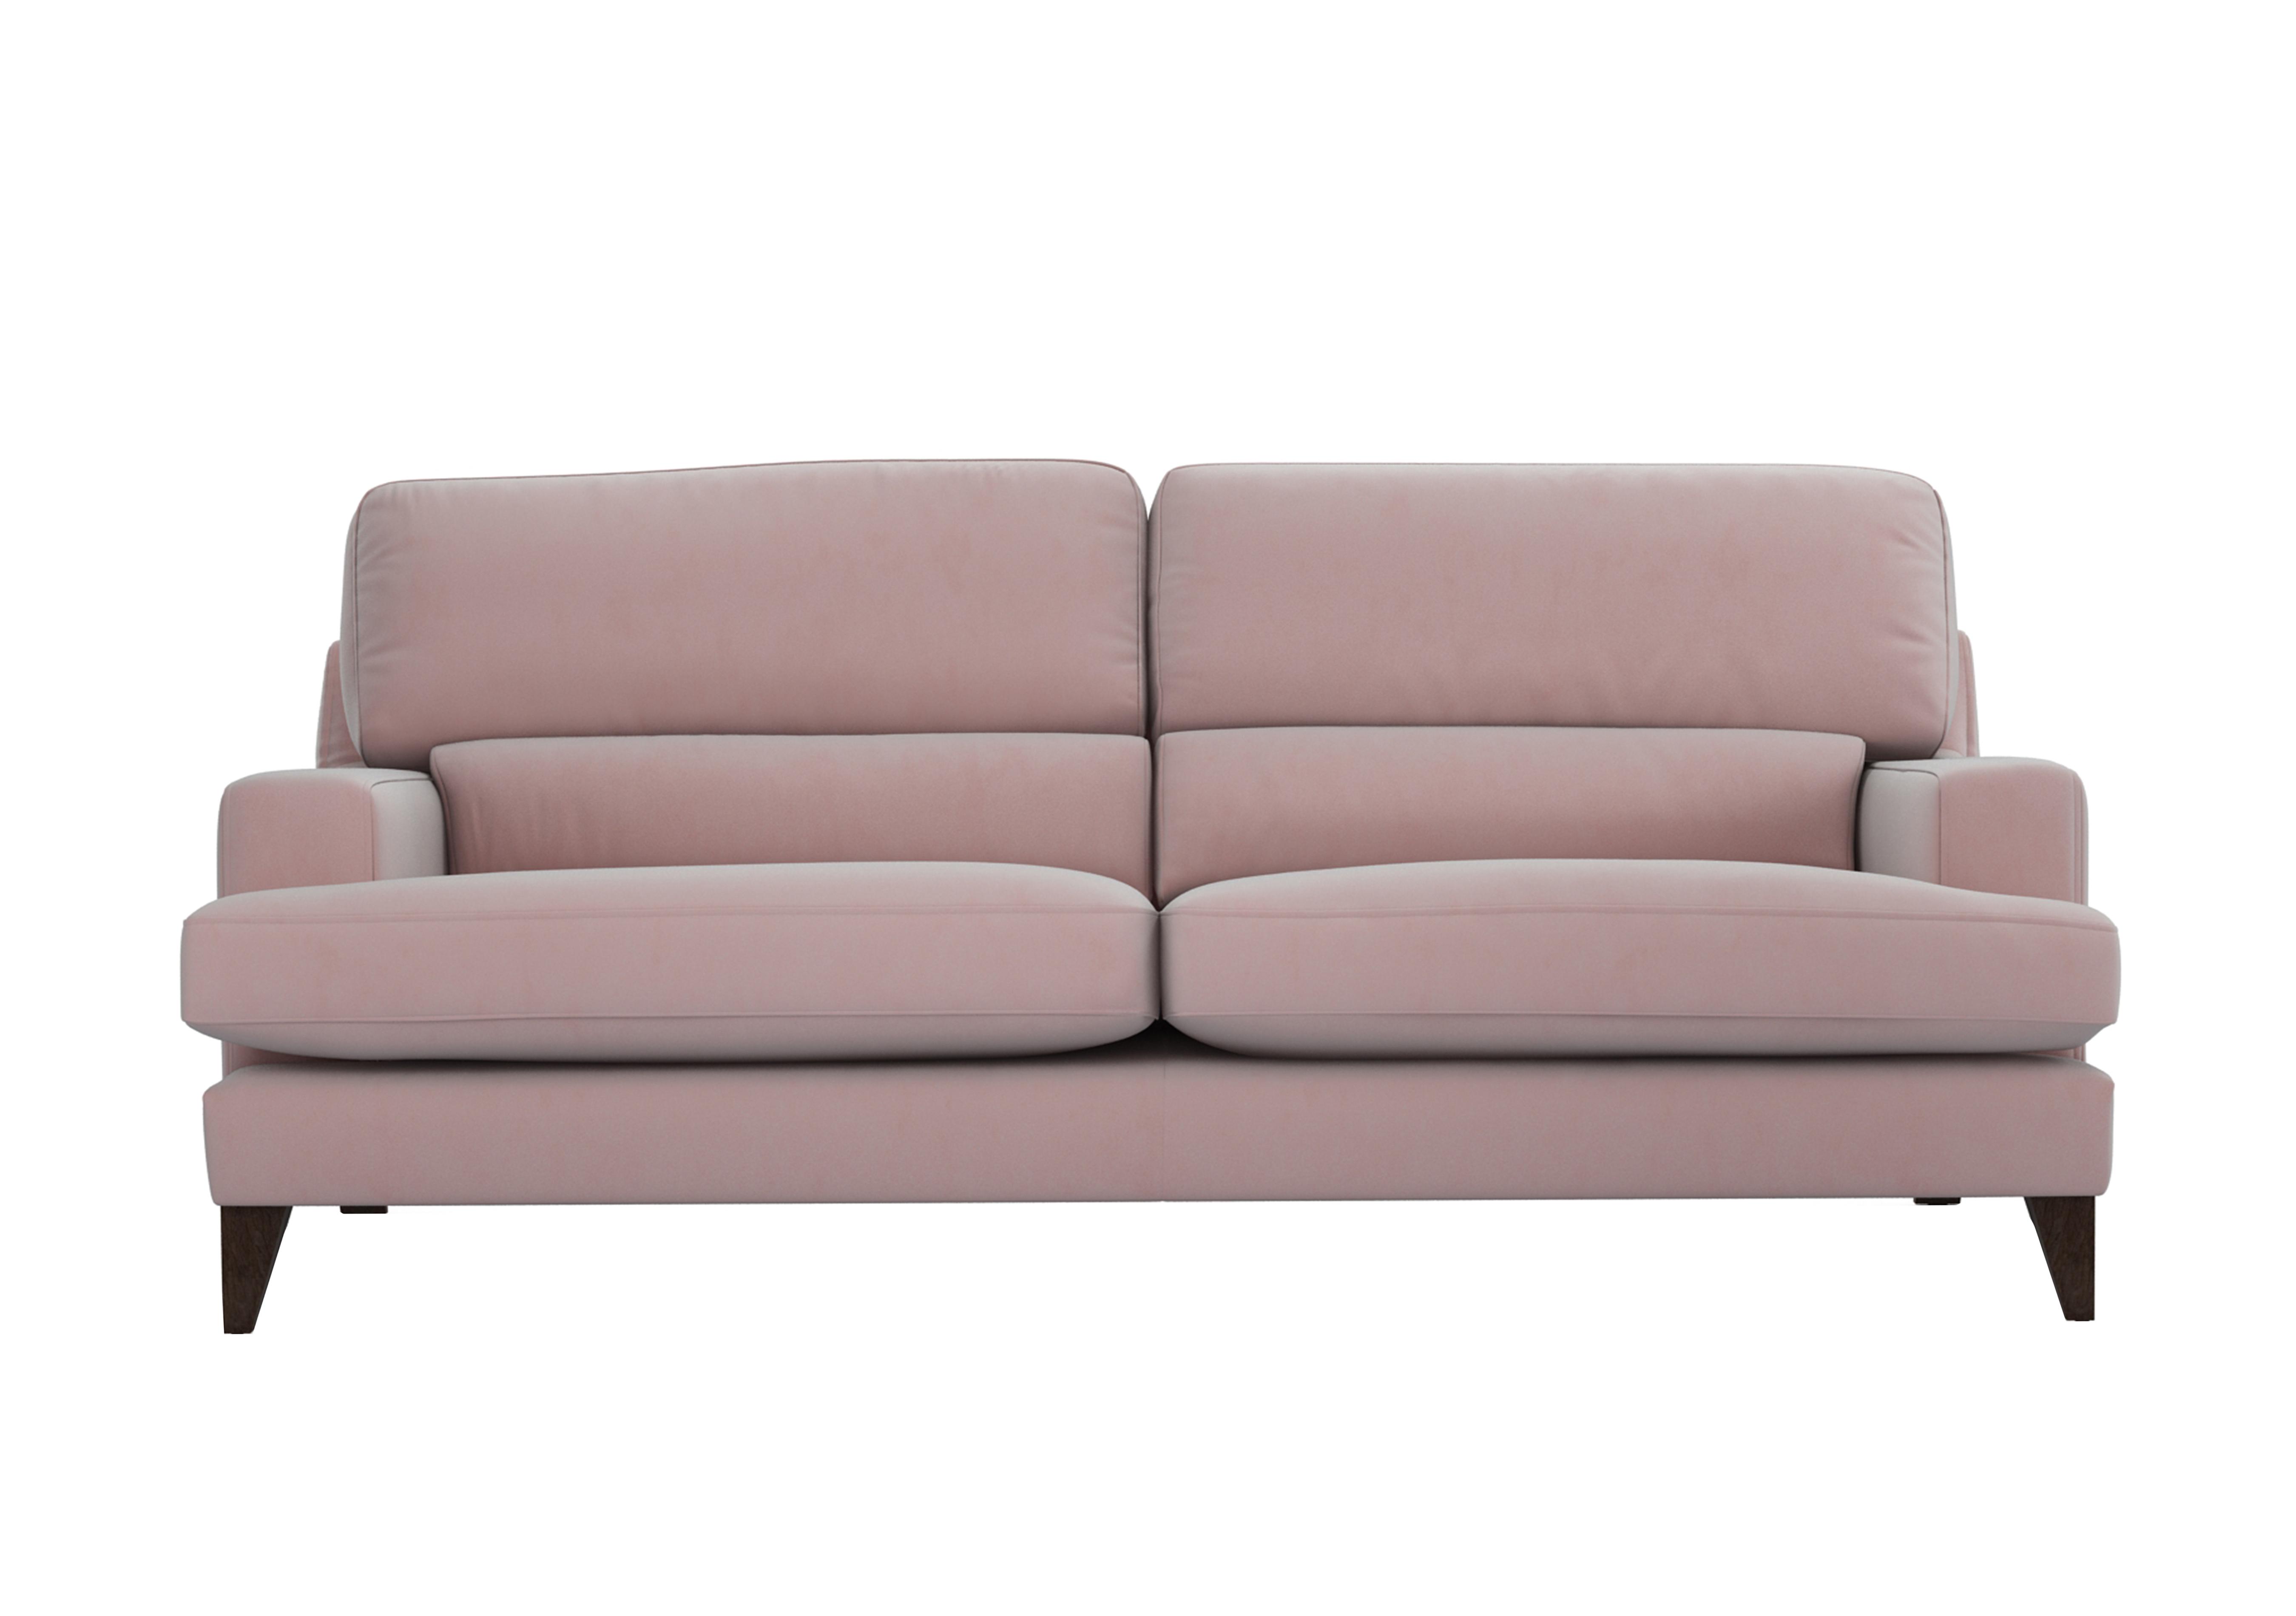 Romilly 4 Seater Fabric Sofa in Cot256 Cotton Candy Wa Ft on Furniture Village